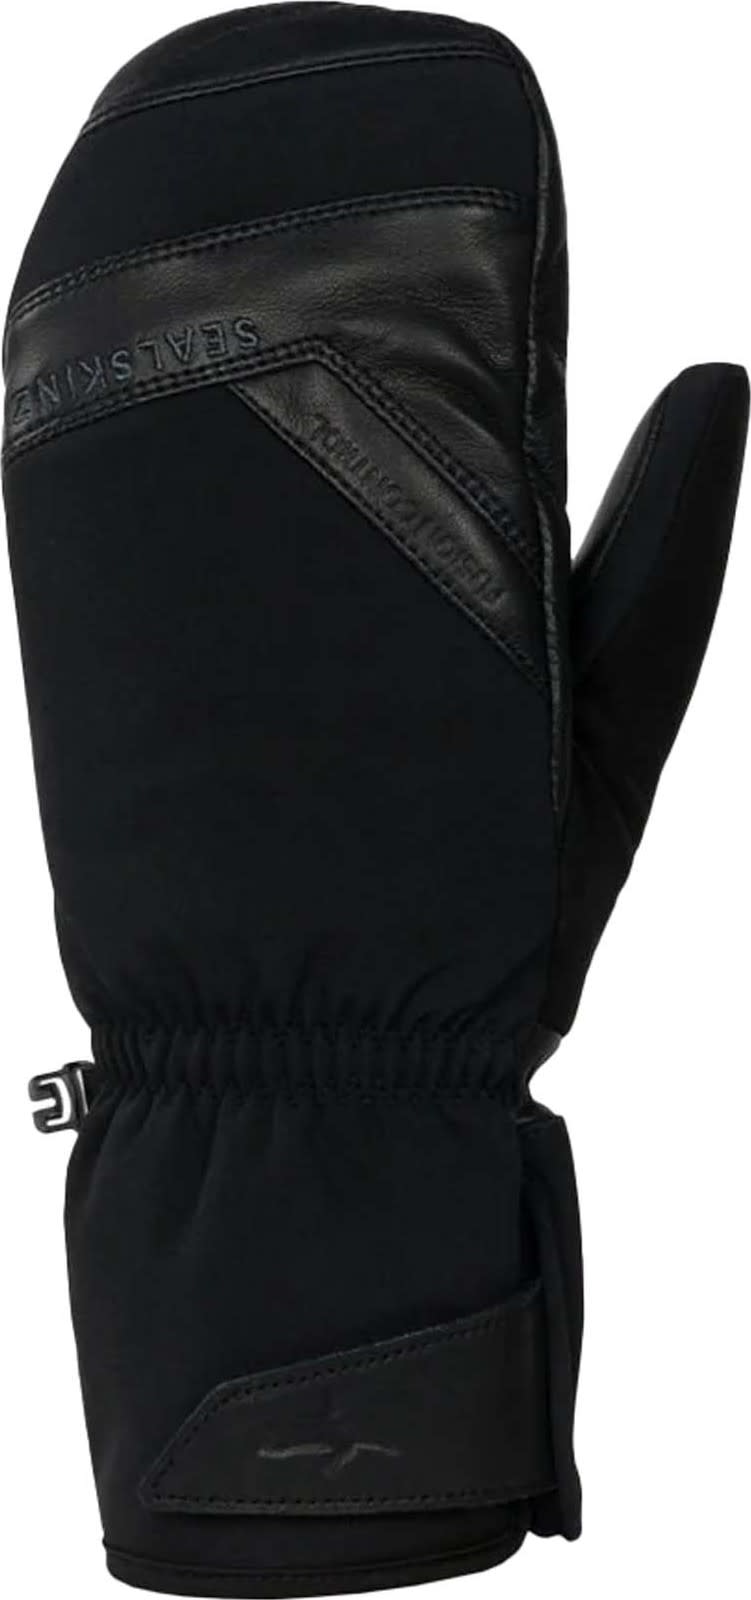 Sealskinz Waterproof Extreme Cold Weather Insulated Mitten with Fusion Control Black